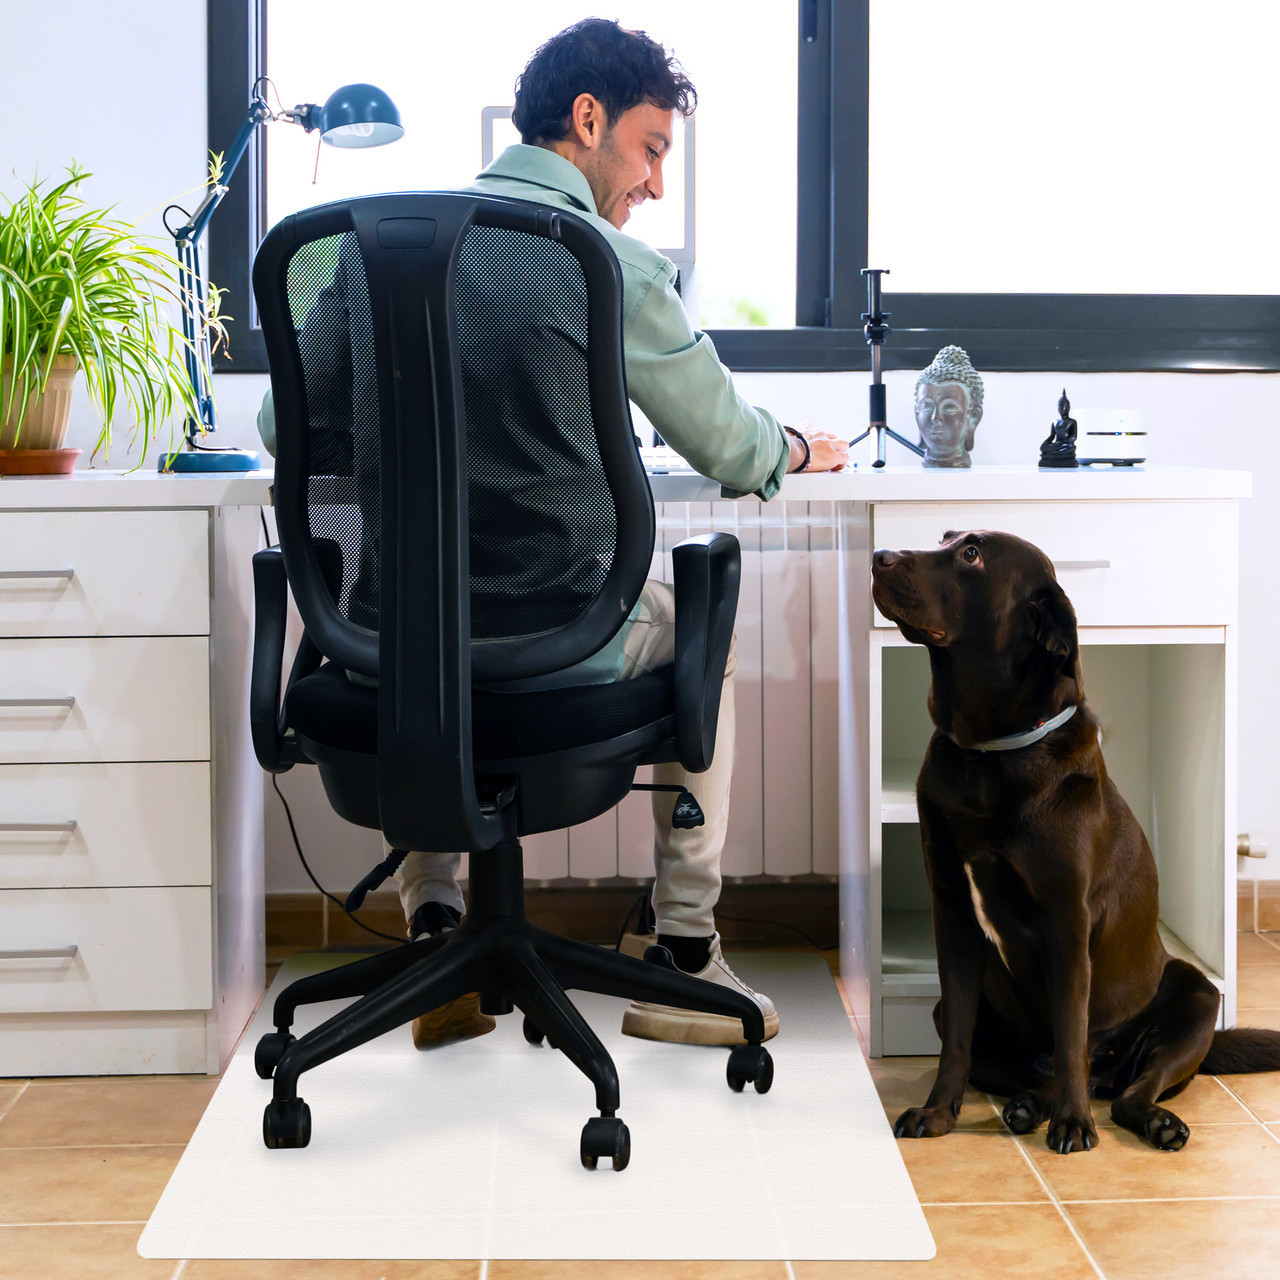 Marvelux Anti-Slip Polypropylene Chair Mat for Hard Floors 29 x 46, White Office  Floor Protector with Non-Slip Backing, Rectangular Floor Protector, Shipped  Flat, Eco-Friendly